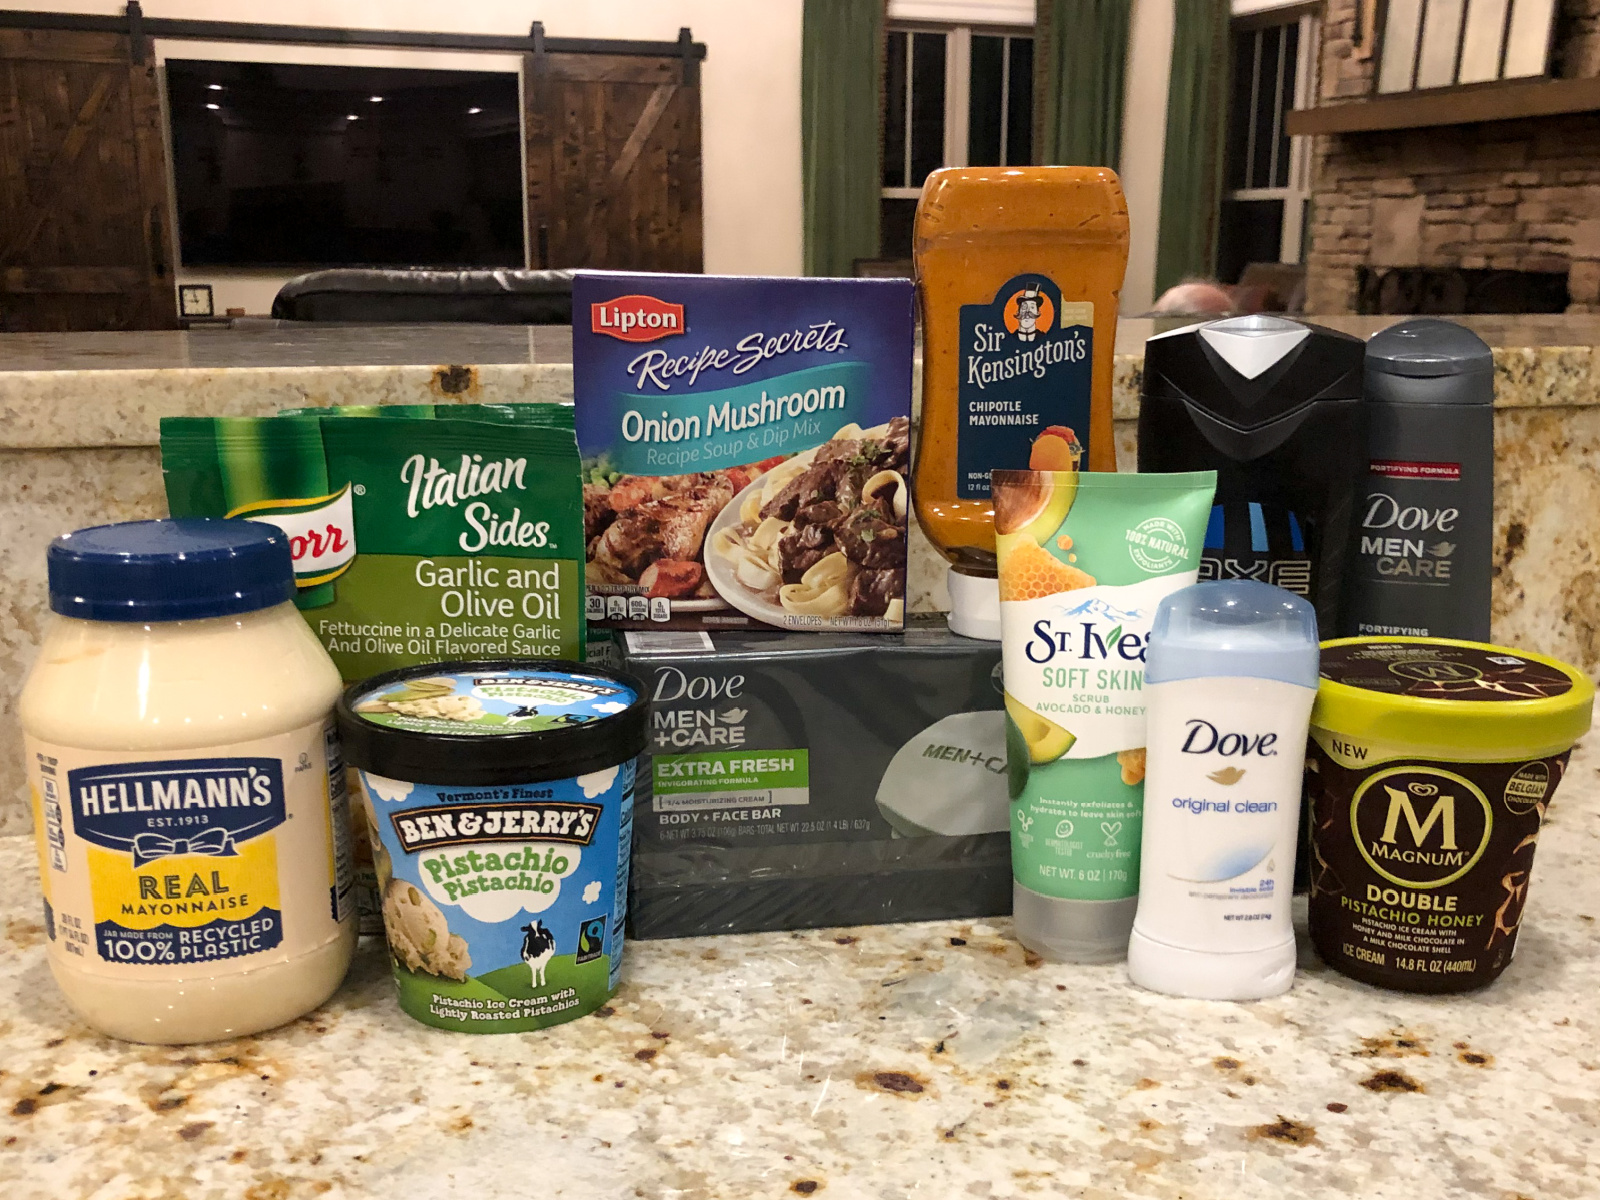 Earn Up To $20 In Gift Cards When You Purchase Your Favorite Unilever Products At Publix on I Heart Publix 1